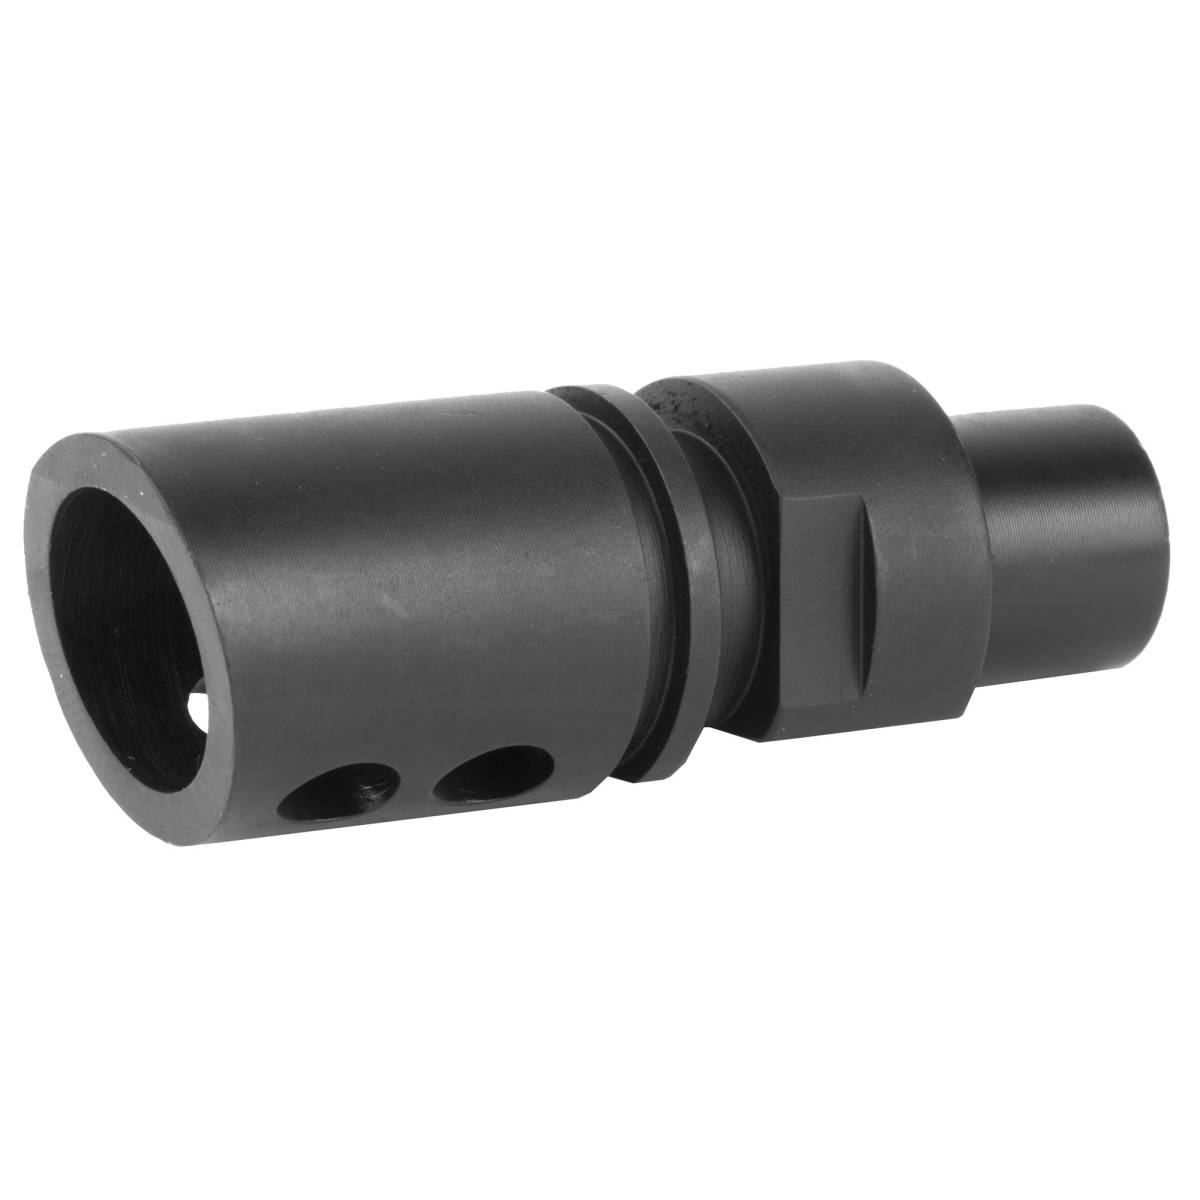 CMMG 57DA5BE Flash Hider Black Steel with M12x1 LH Threads for 5.7x28mm...-img-2